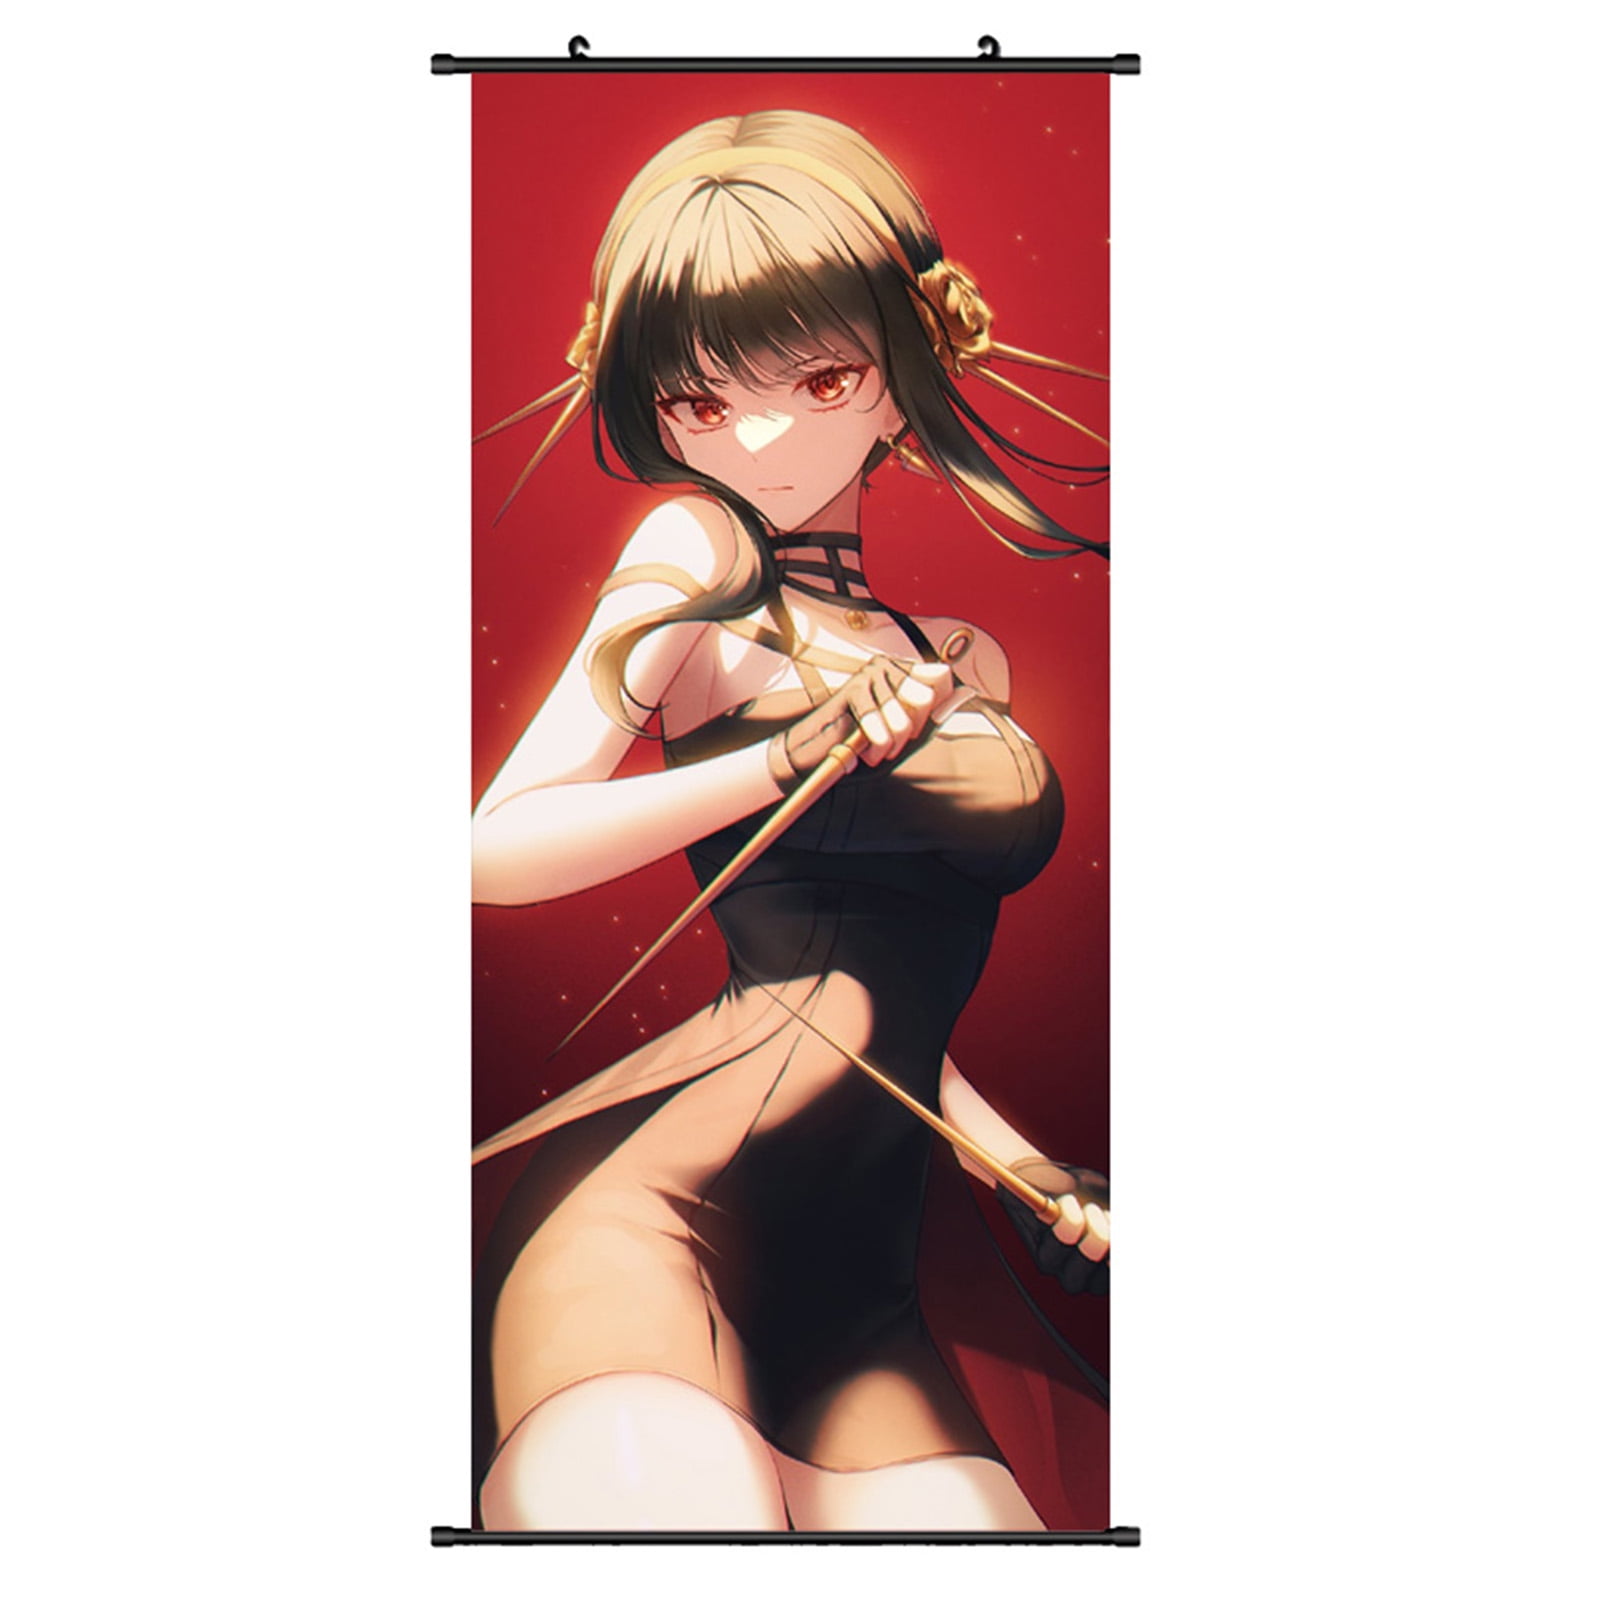 Anime Tenjou Tenge Canvas Art Poster Family Bedroom Posters Gifts  20x30inch(50x75cm)